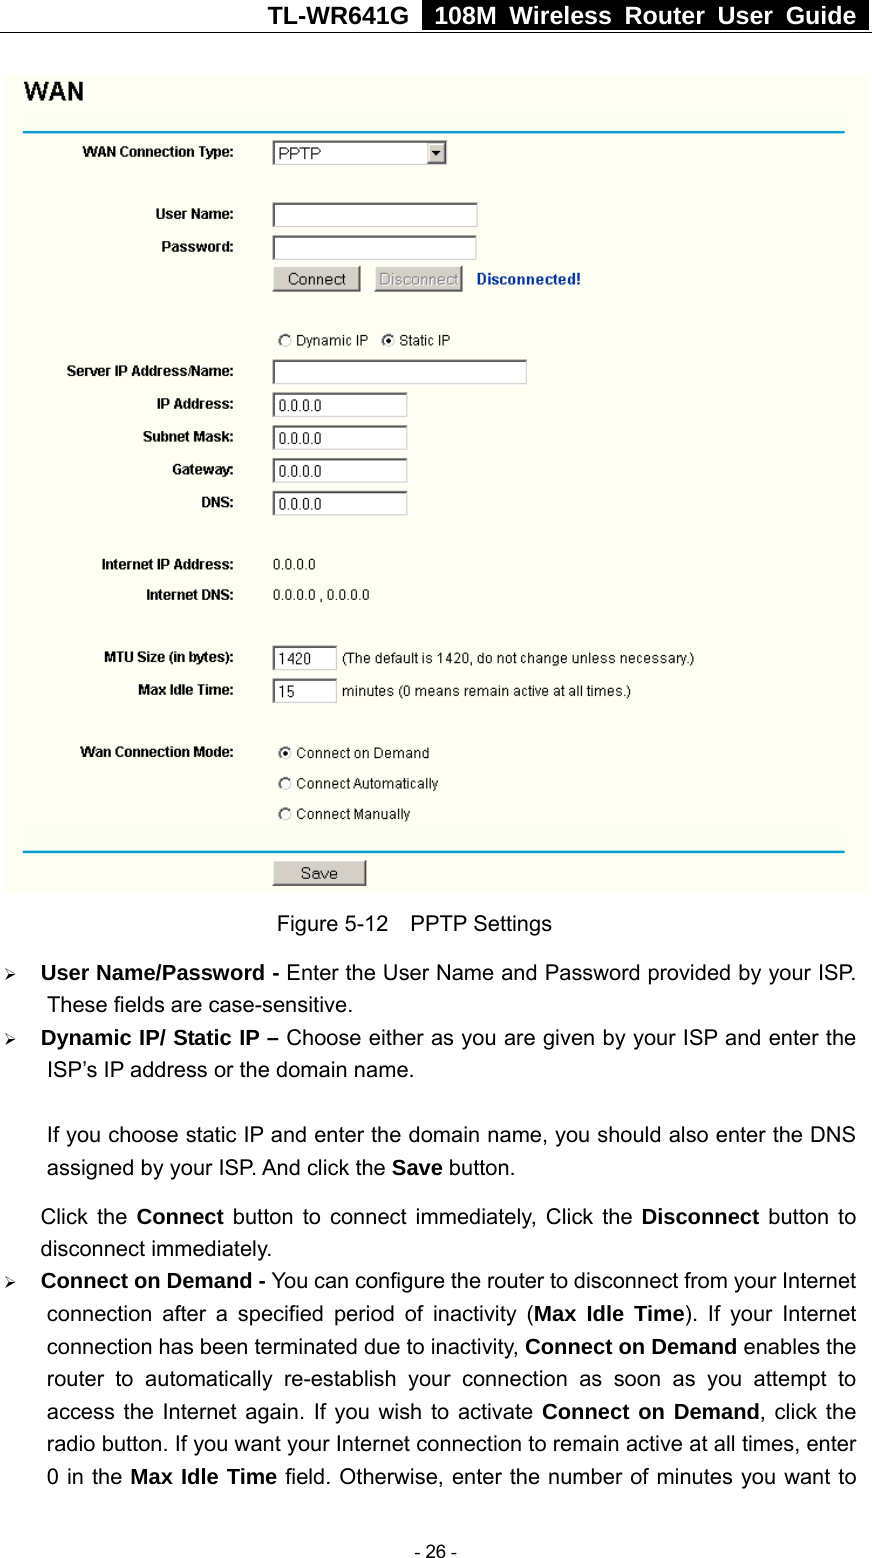 TL-WR641G   108M Wireless Router User Guide   Figure 5-12  PPTP Settings ¾ User Name/Password - Enter the User Name and Password provided by your ISP. These fields are case-sensitive. ¾ Dynamic IP/ Static IP – Choose either as you are given by your ISP and enter the ISP’s IP address or the domain name.  If you choose static IP and enter the domain name, you should also enter the DNS assigned by your ISP. And click the Save button. Click the Connect button to connect immediately, Click the Disconnect button to disconnect immediately. ¾ Connect on Demand - You can configure the router to disconnect from your Internet connection after a specified period of inactivity (Max Idle Time). If your Internet connection has been terminated due to inactivity, Connect on Demand enables the router to automatically re-establish your connection as soon as you attempt to access the Internet again. If you wish to activate Connect on Demand, click the radio button. If you want your Internet connection to remain active at all times, enter 0 in the Max Idle Time field. Otherwise, enter the number of minutes you want to  - 26 - 